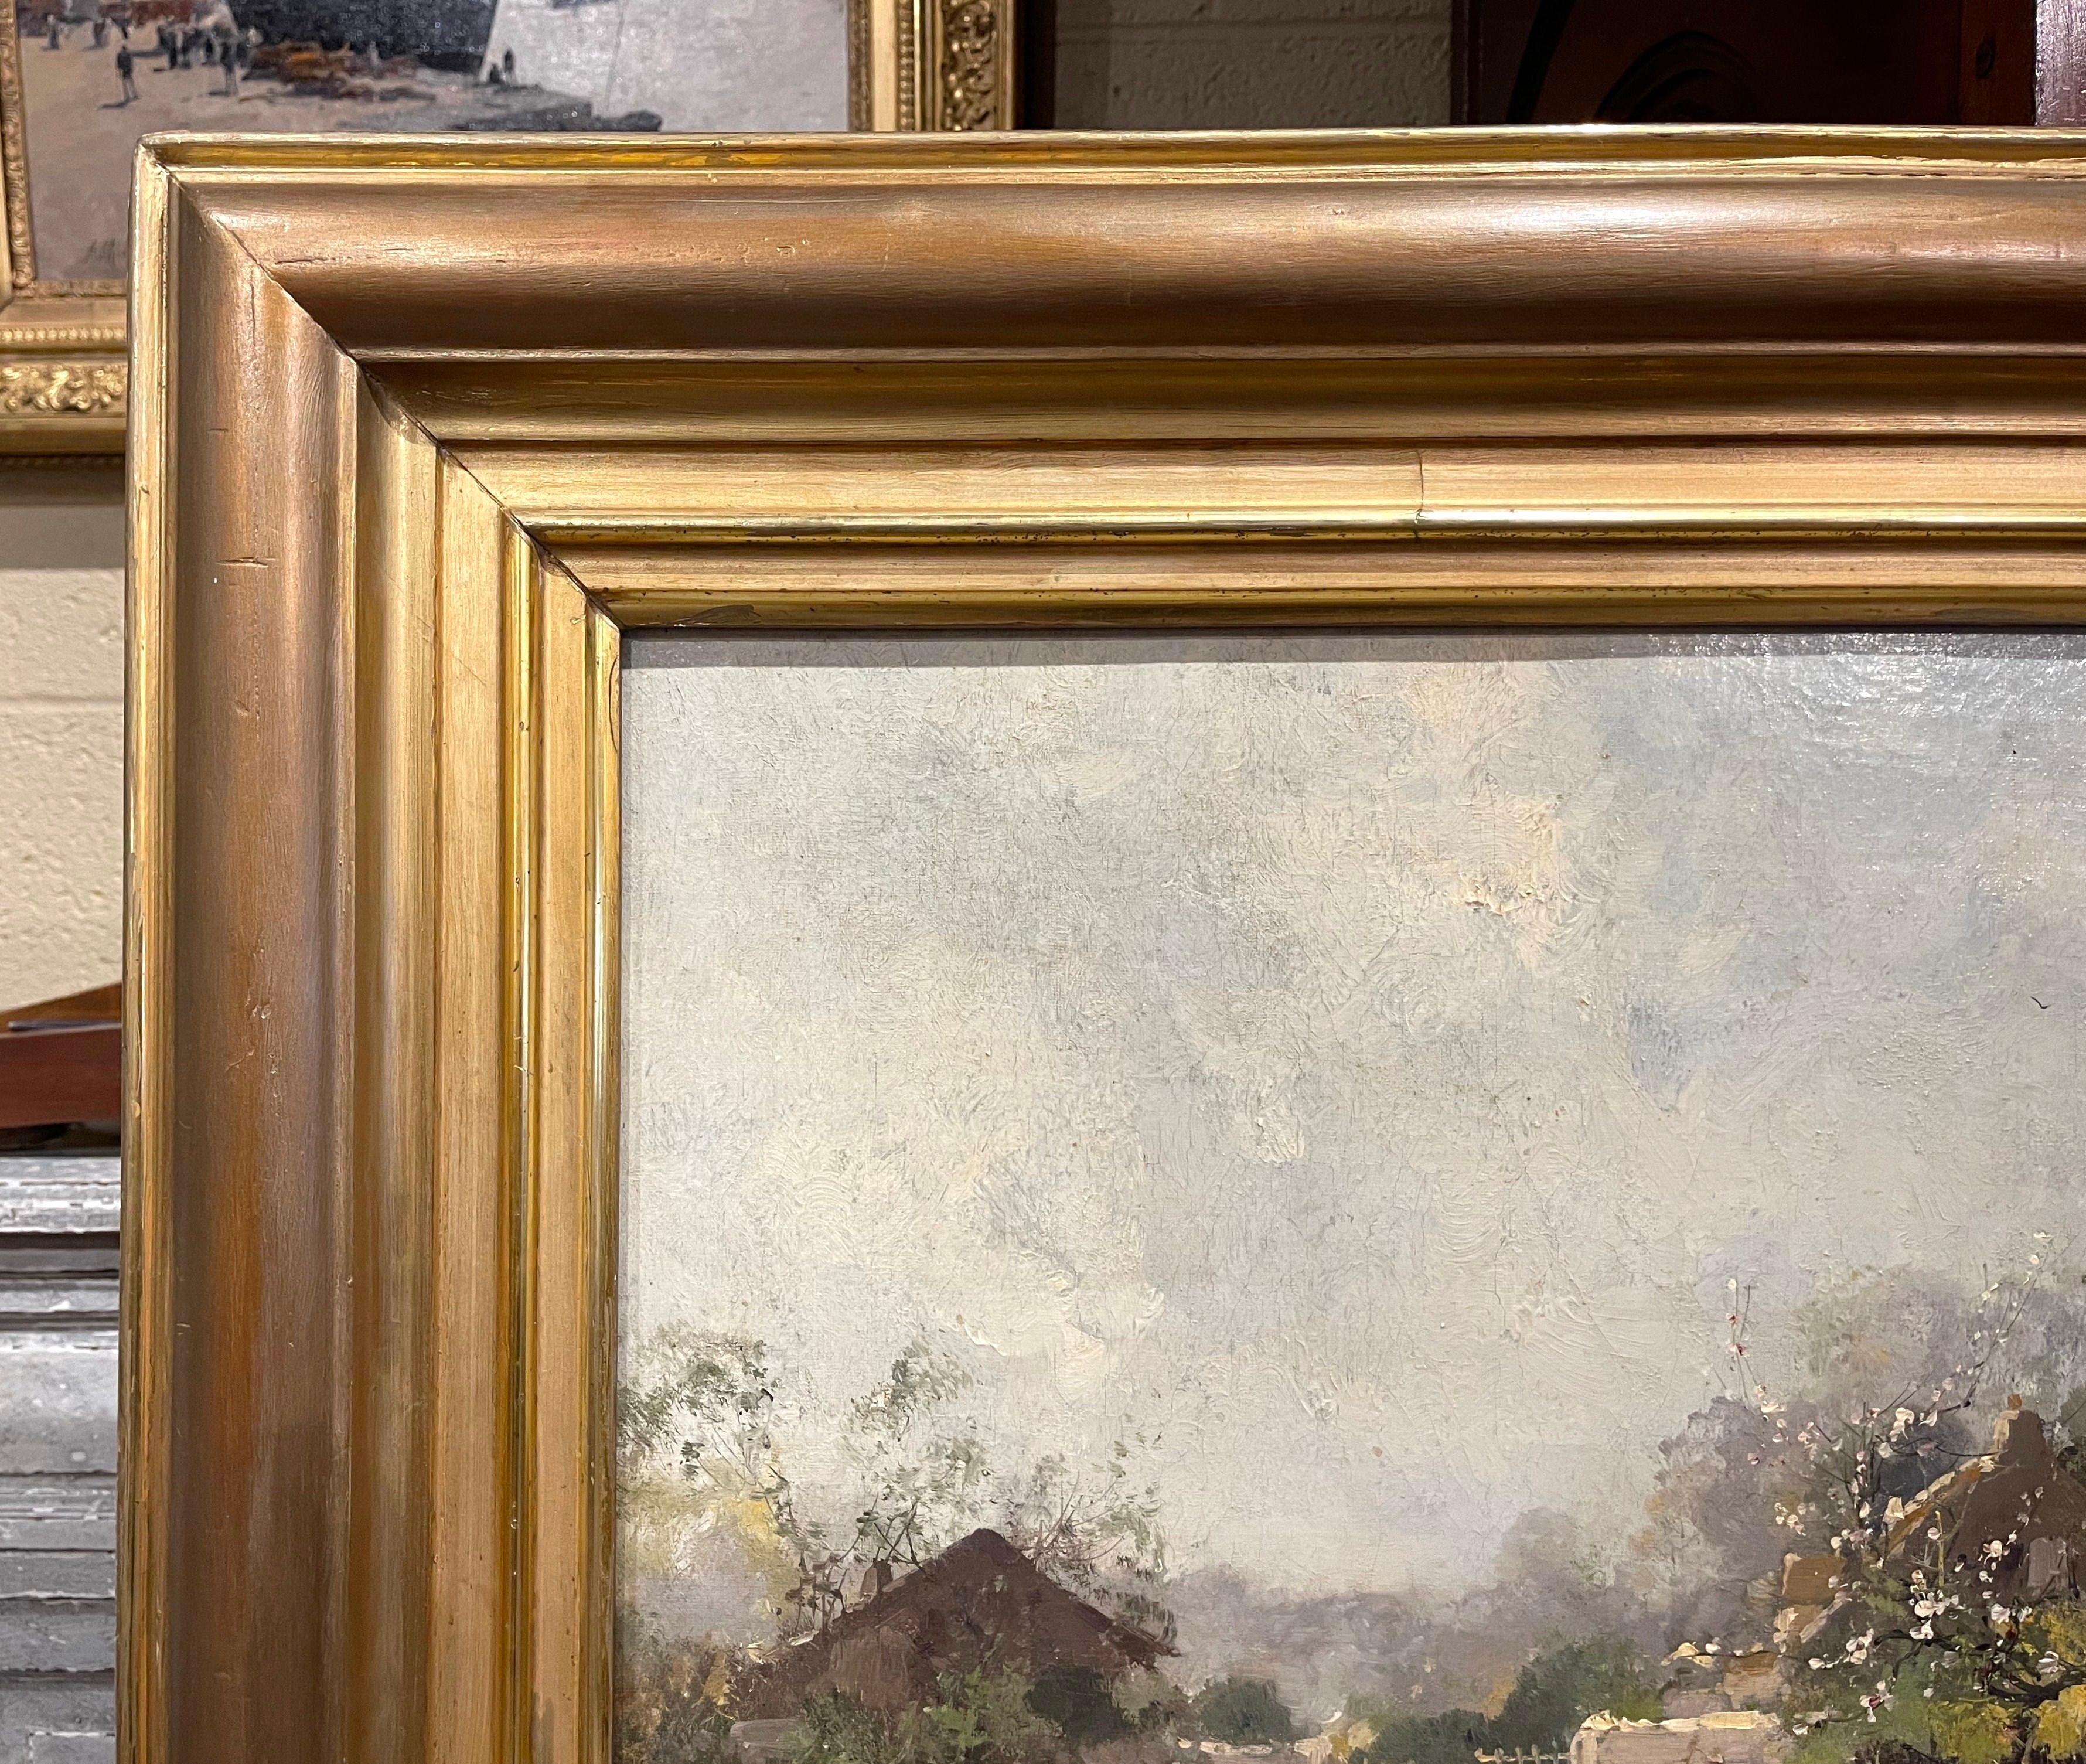  19th Century Framed Farmyard Oil Painting Signed Kermanguy for E. Galien-Laloue For Sale 1